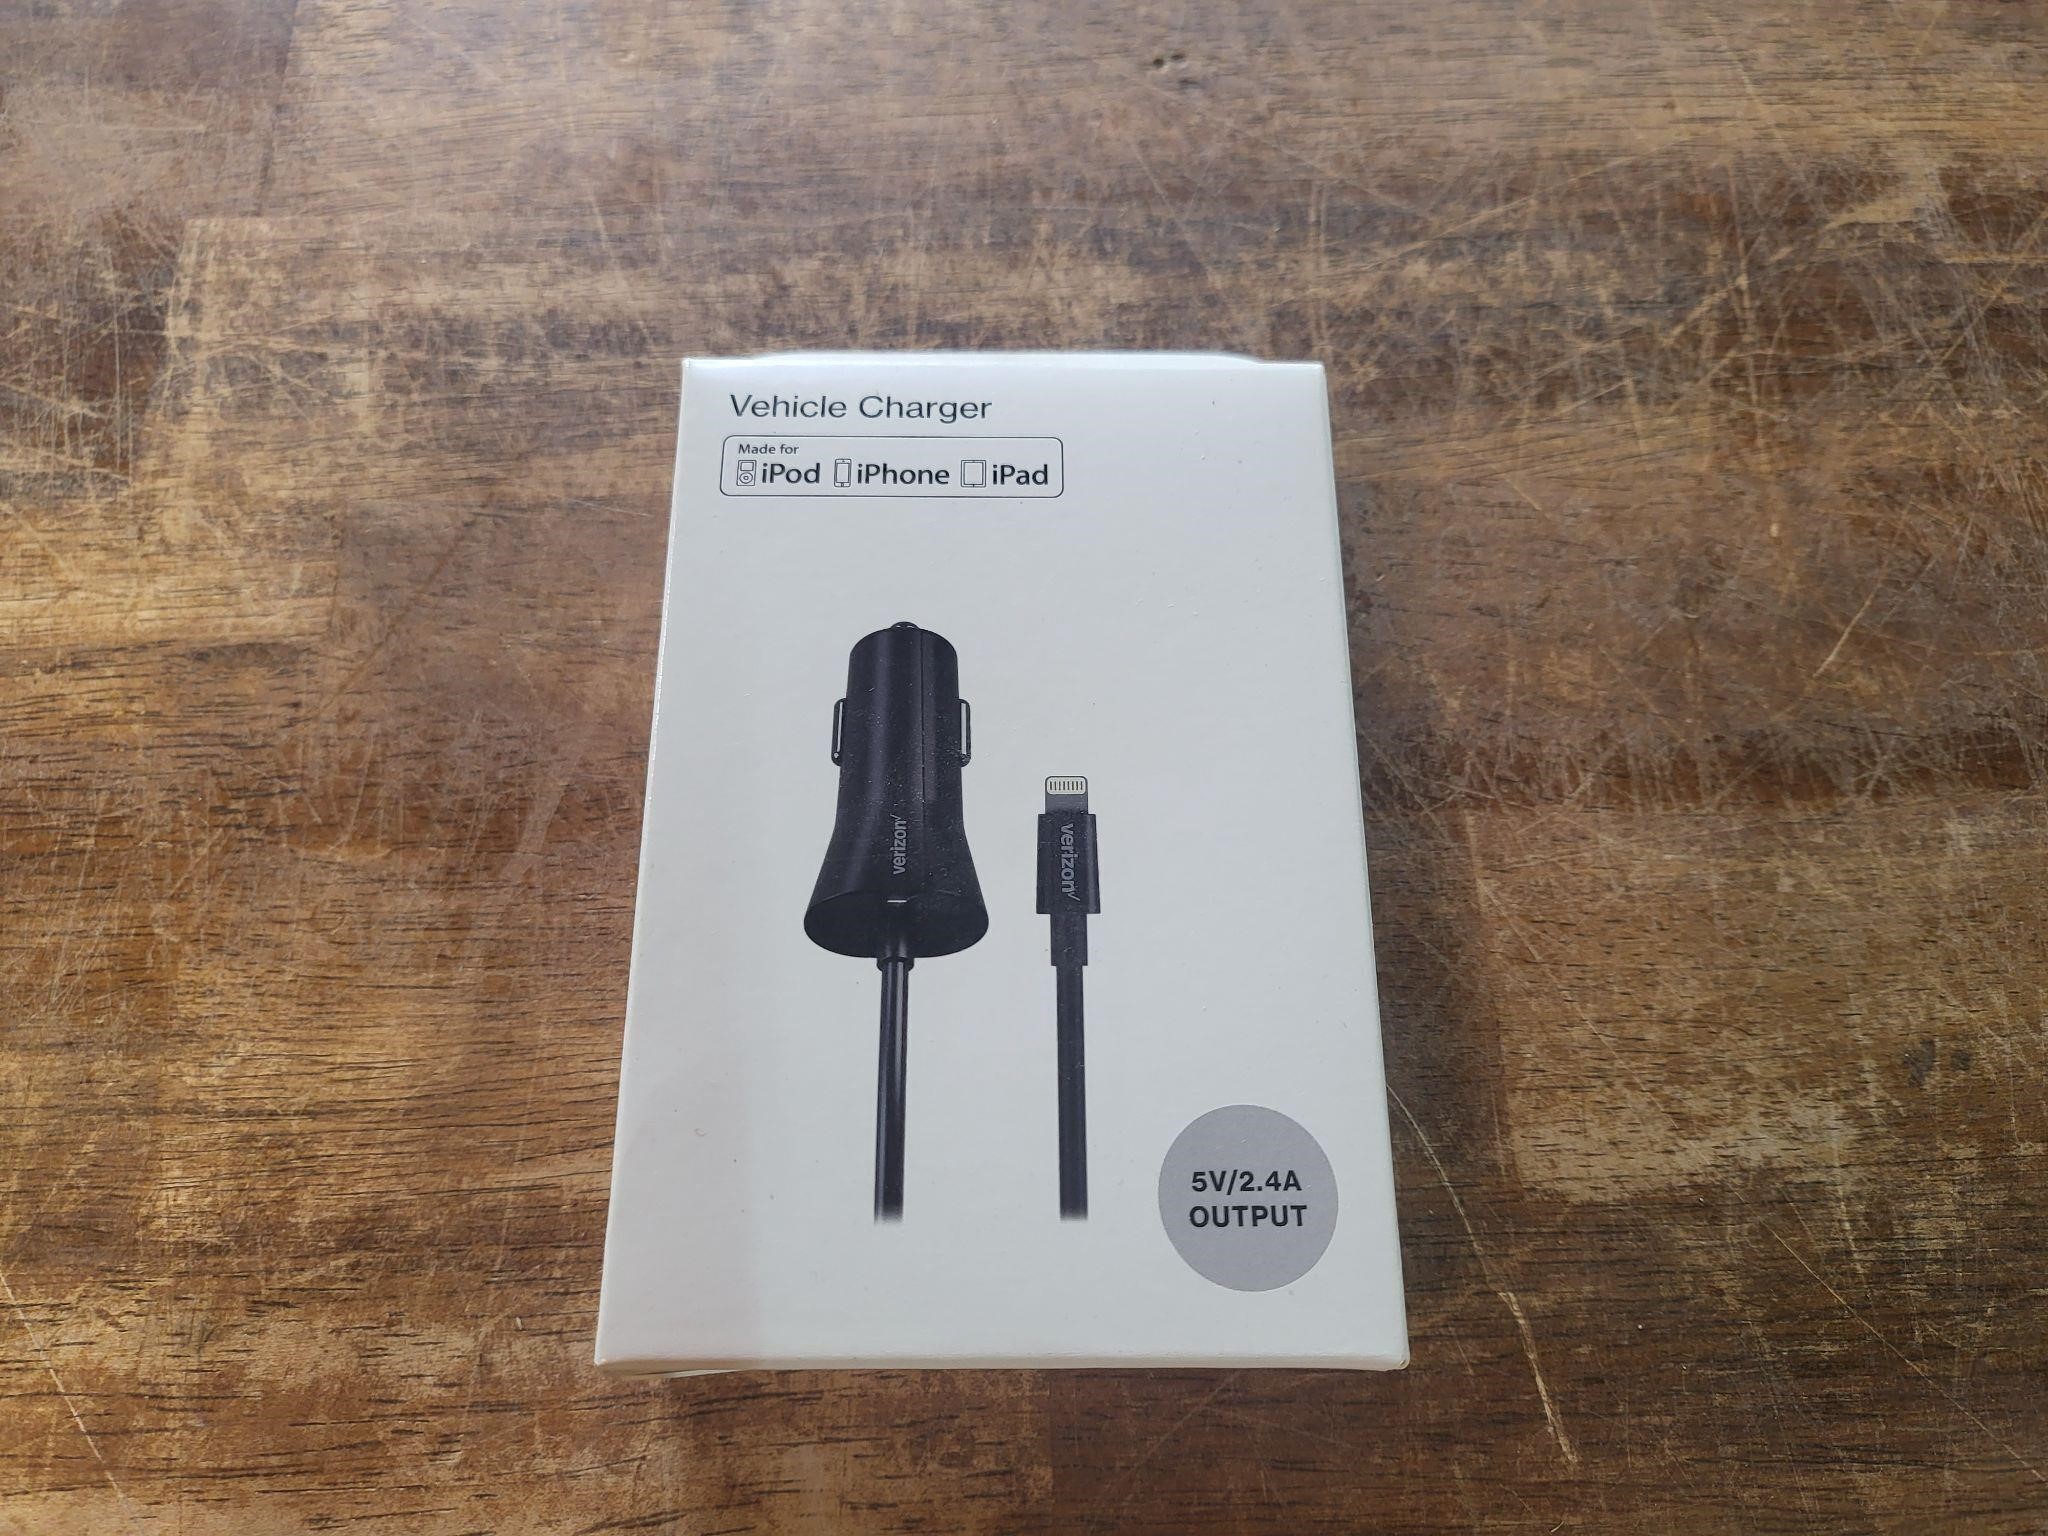 iPhone car charger sealed